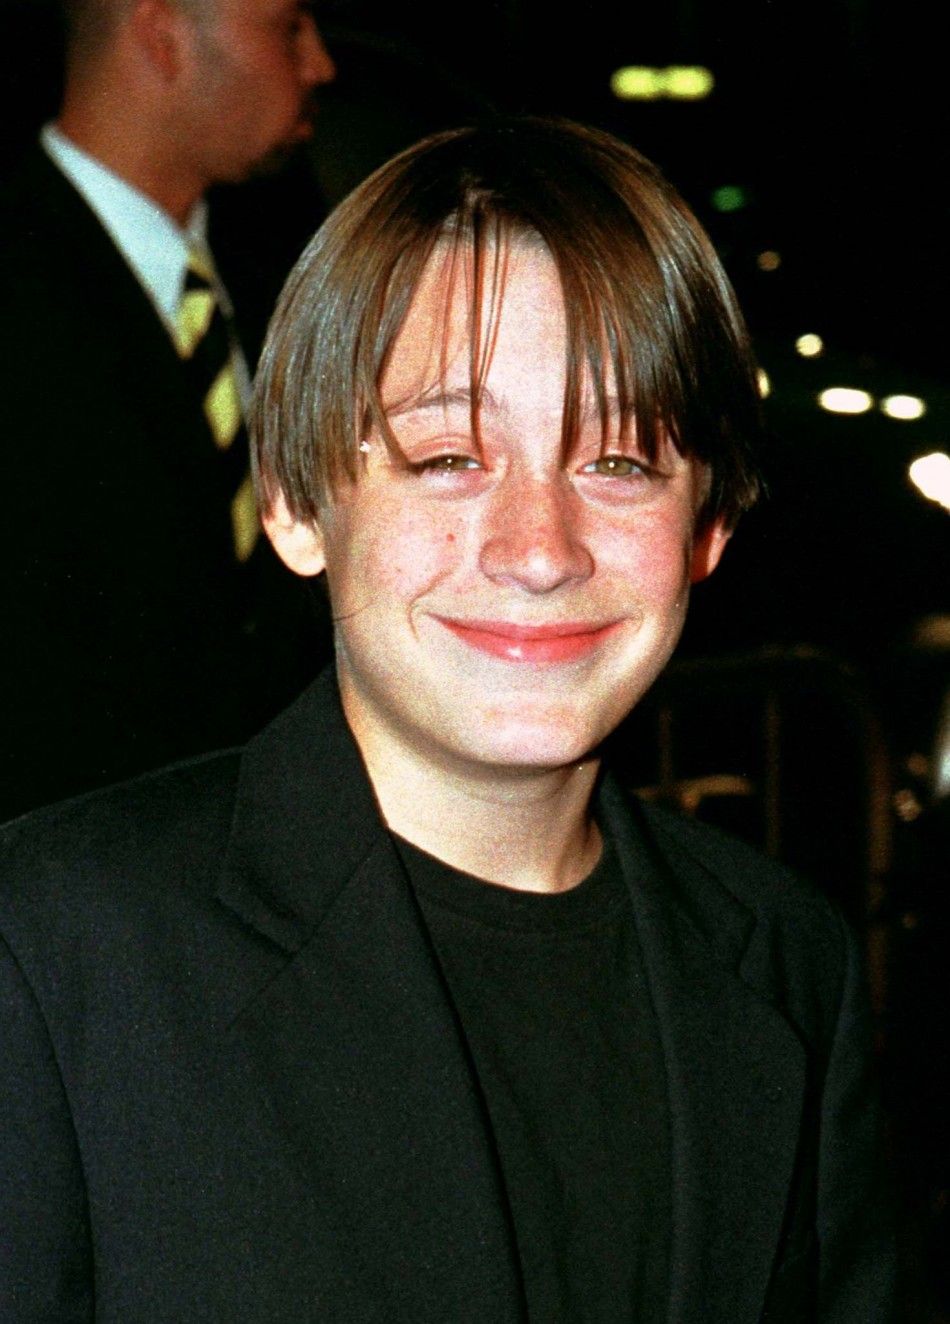 Actor Kieran Culkin poses for photographers at the premiere of his film, quotThe Mighty,quot October 7, 1998 in Los Angeles.